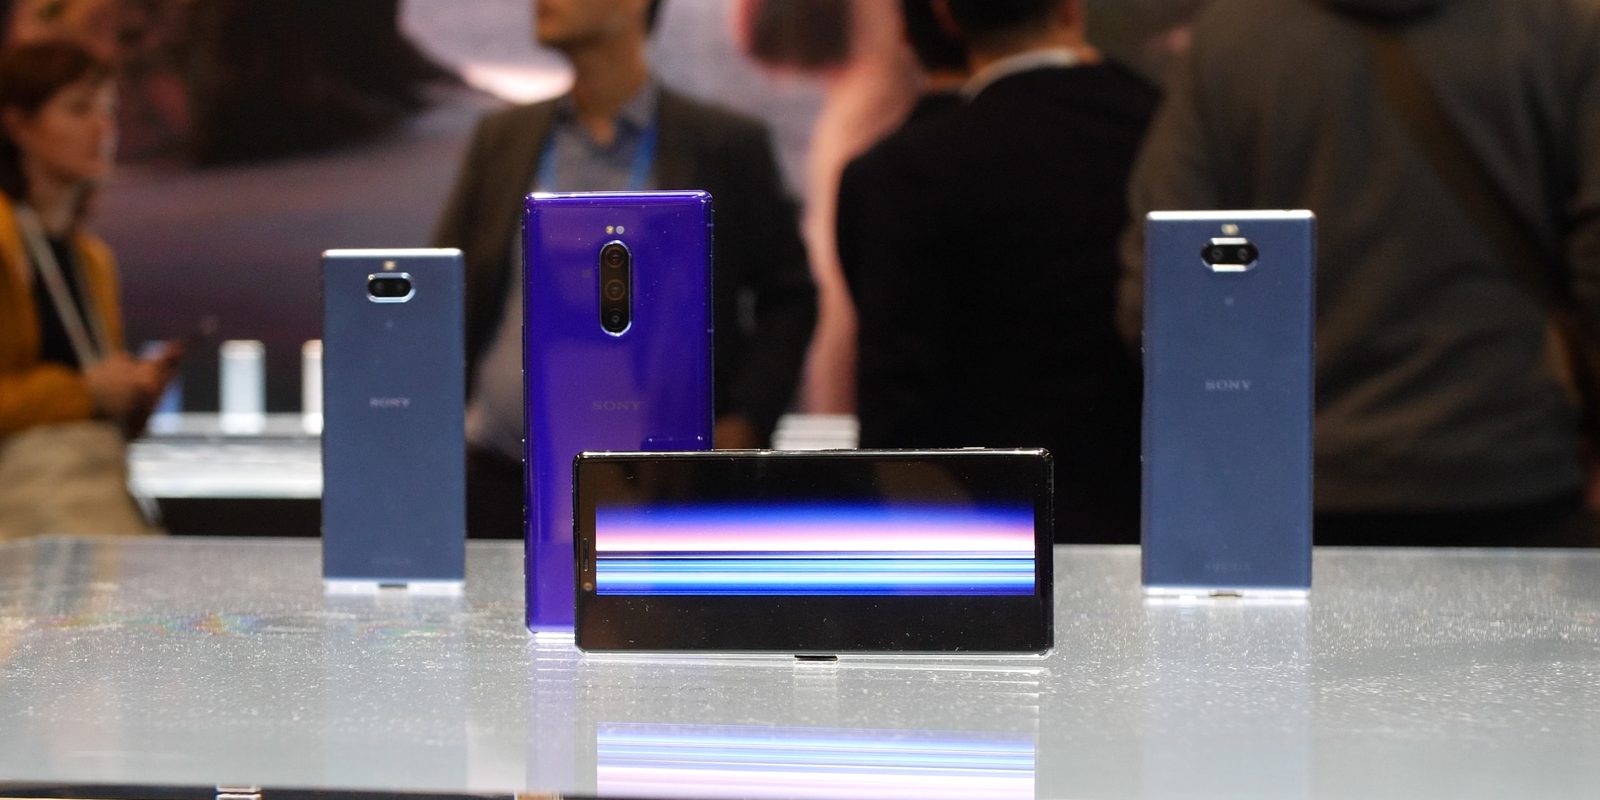 Sony Xperia 1 The Sony’s First  21:9 Screen Ratio on a smartphone